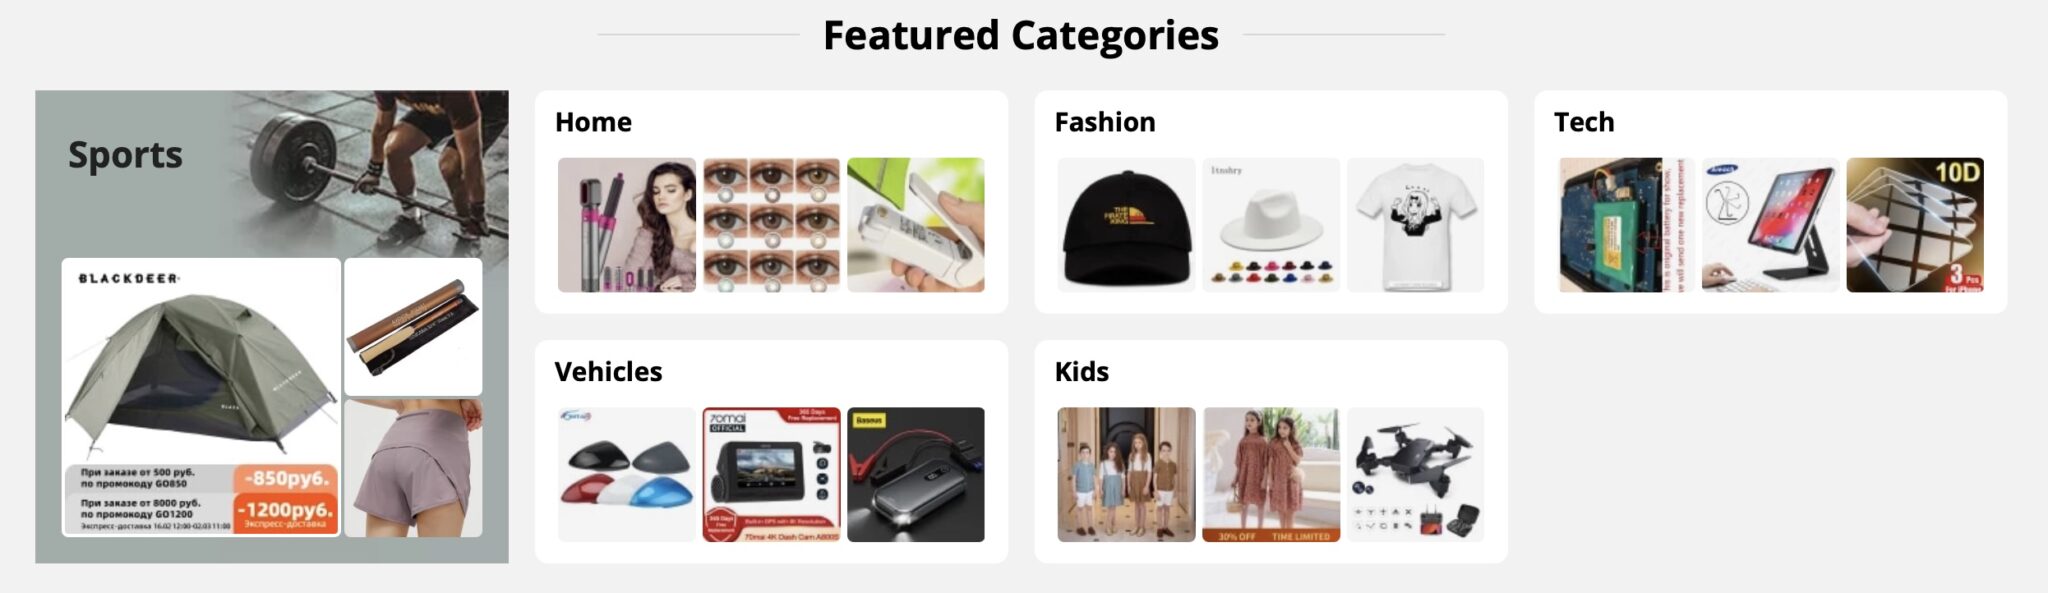 aliexpress featured categories scaled